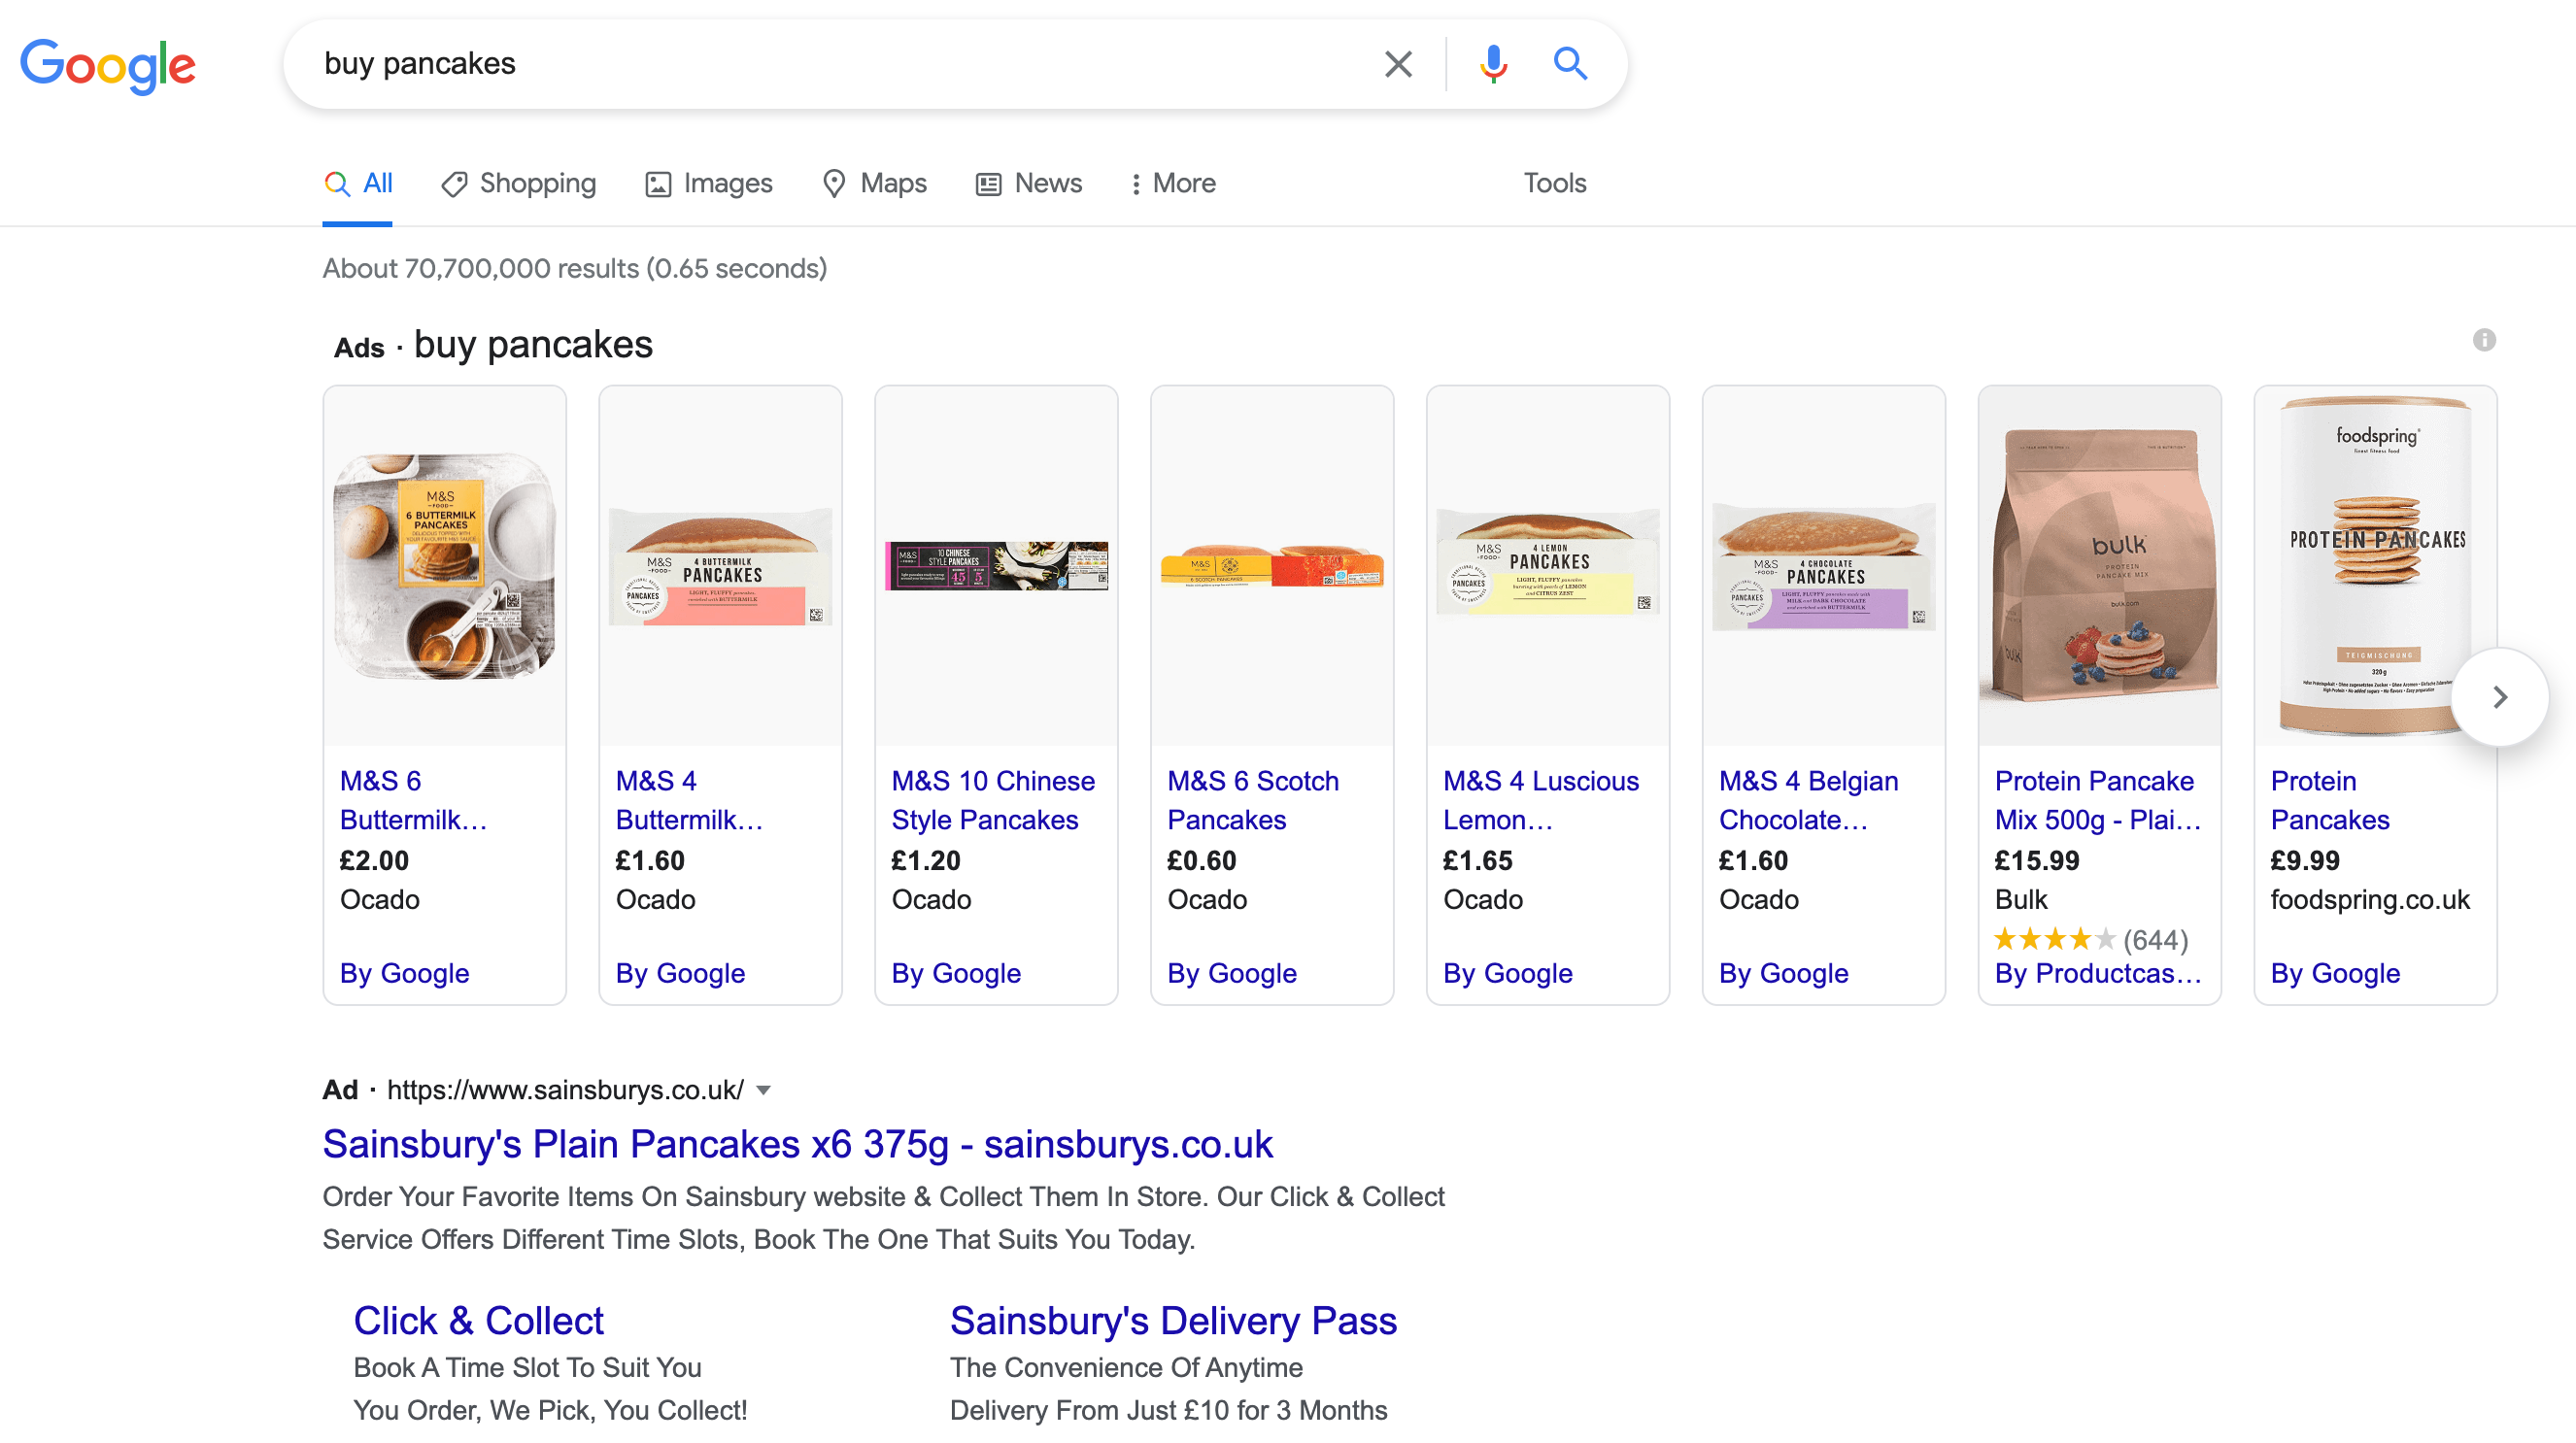 Transactional user internet example on Google search